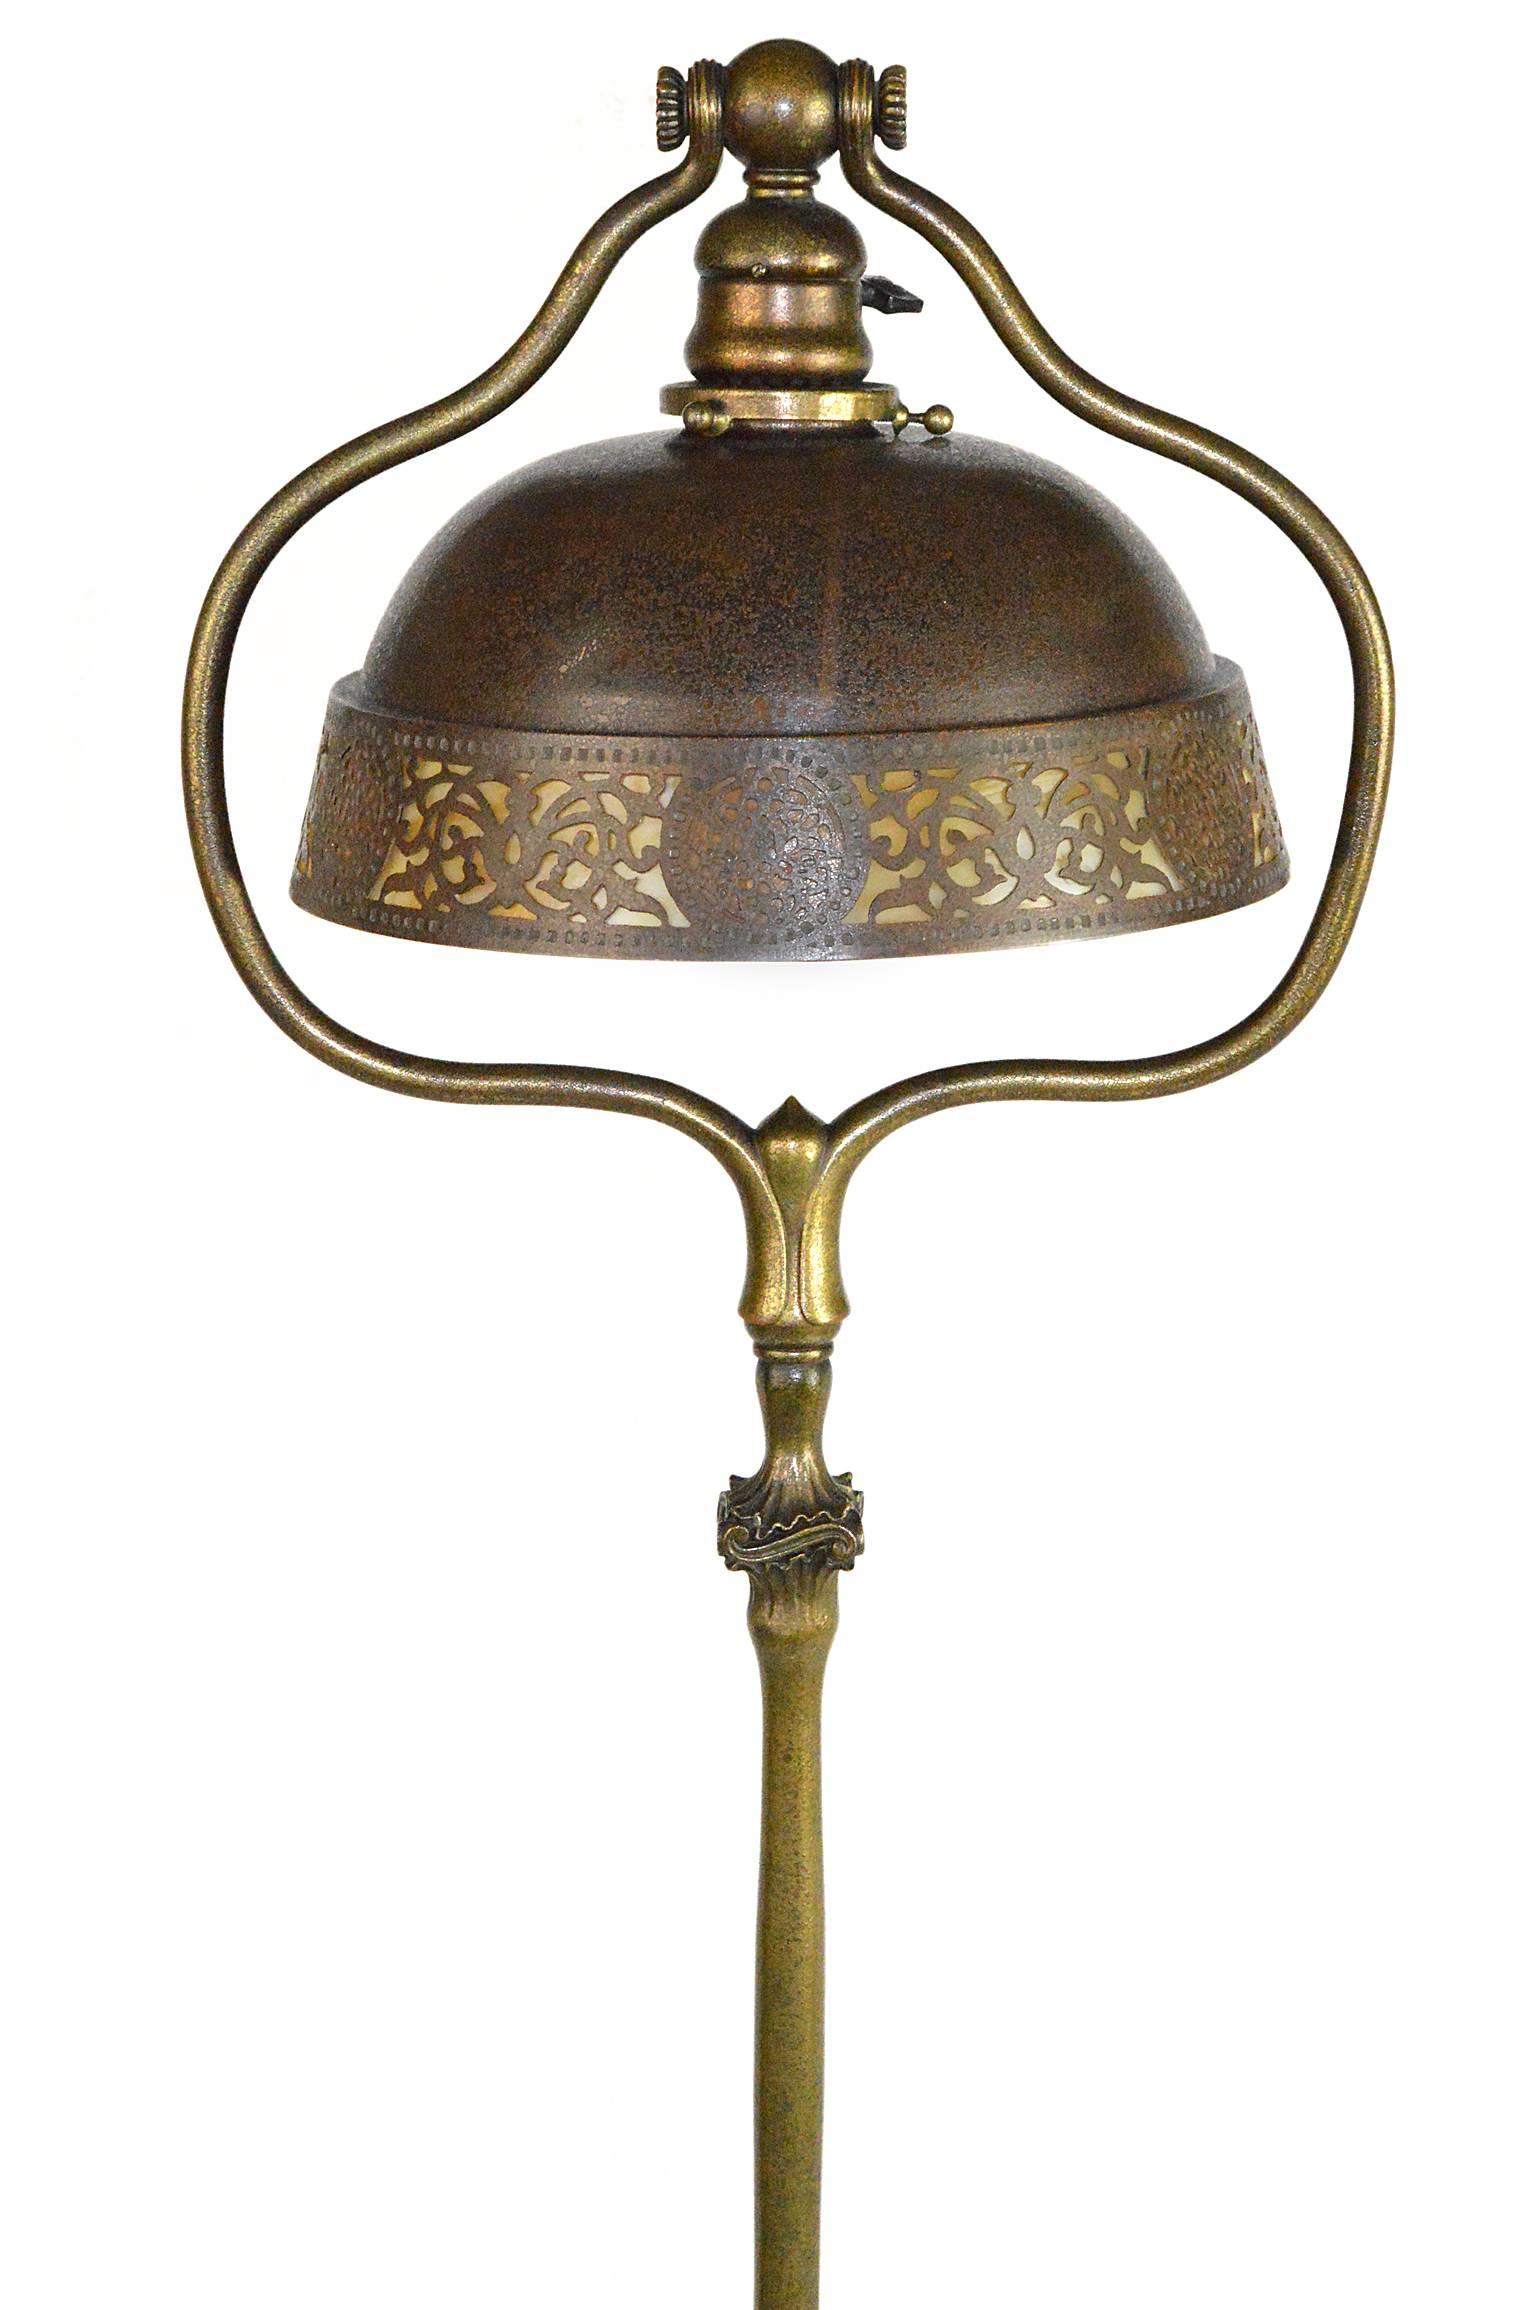 Tiffany Studio bronze floor lamp with bronze and glass shade. Gilt bronze base with four panel metal supports on stepped circular base. Stamped 